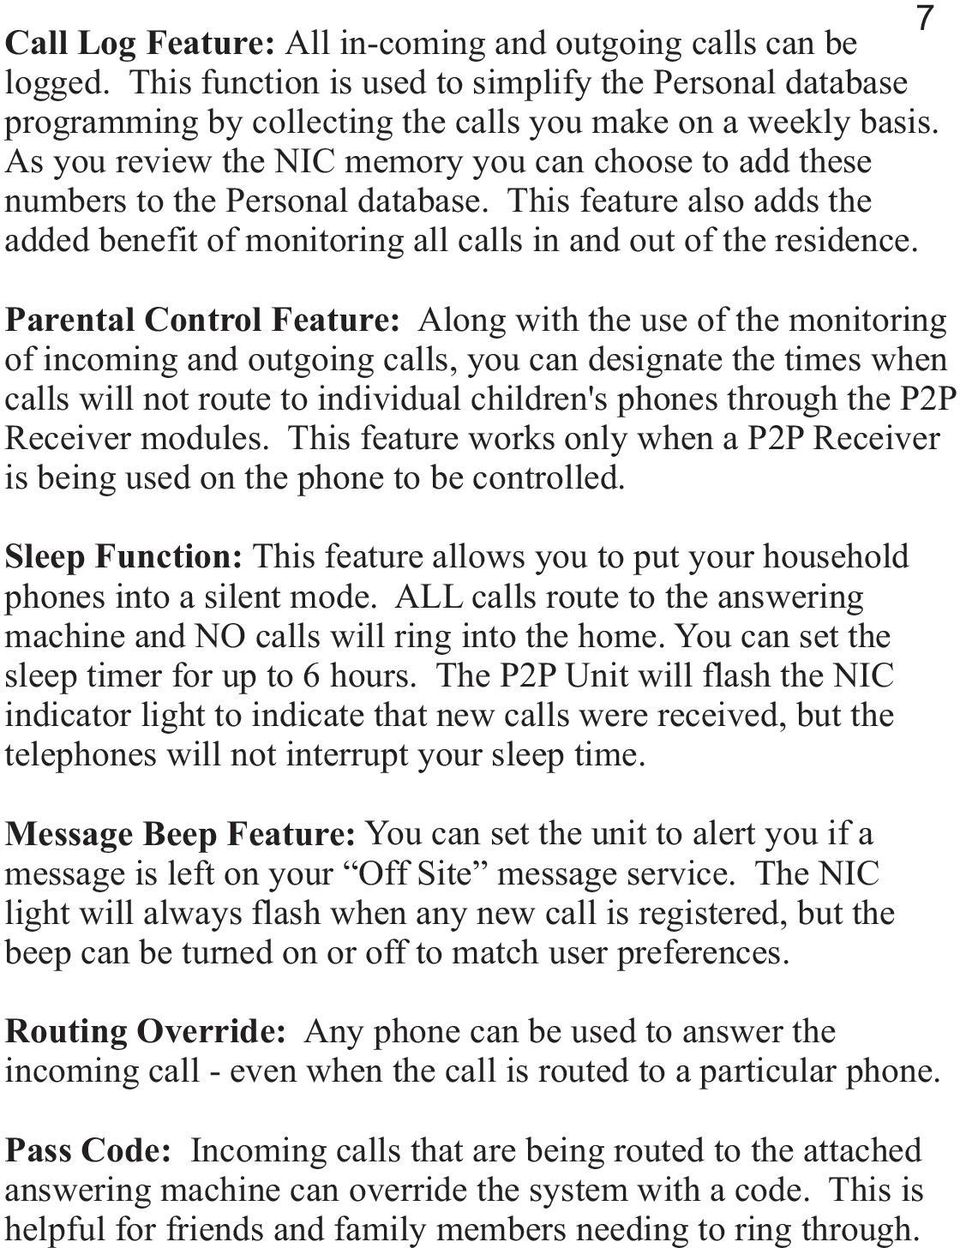 Parental Control Feature: Along with the use of the monitoring of incoming and outgoing calls, you can designate the times when calls will not route to individual children's phones through the P2P